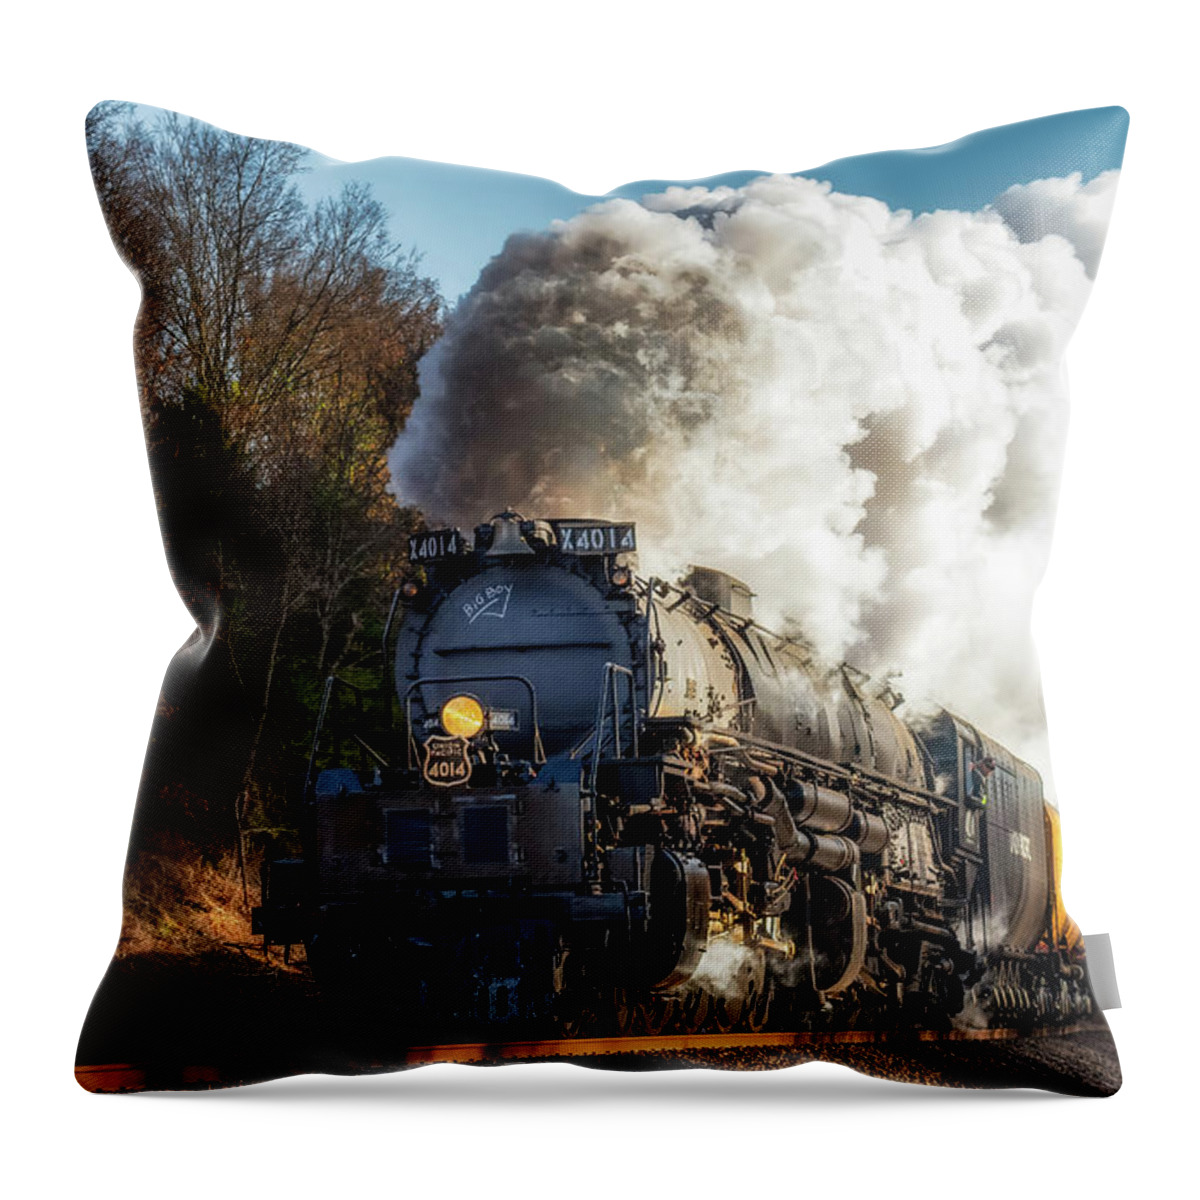 Engine 4014 Throw Pillow featuring the photograph Big Boy Under Steam by James Barber